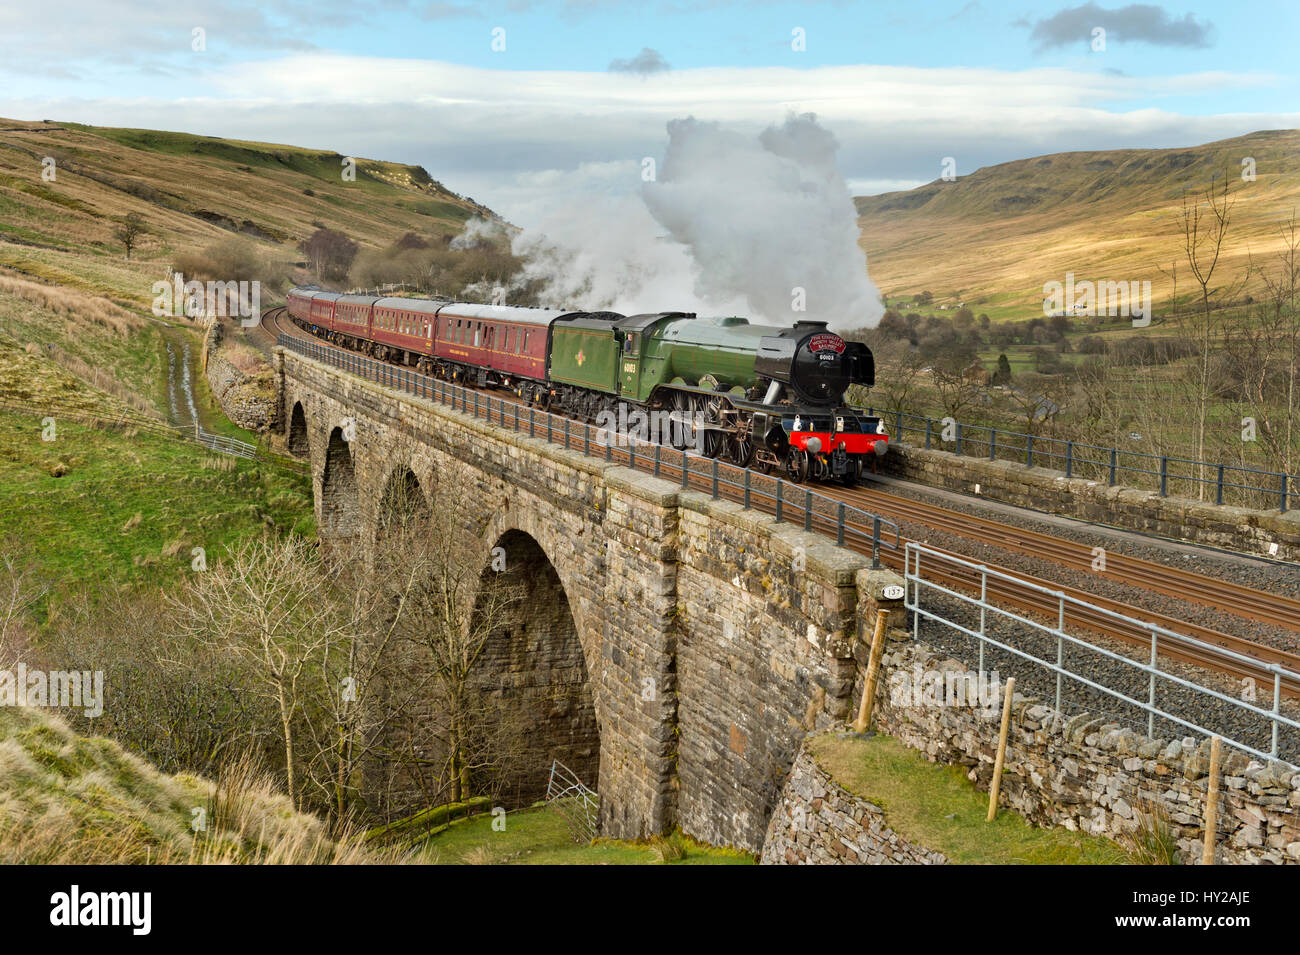 Cumbria, UK. 31st Mar, 2017.  The Flying Scotsman passes over Ais Gill Viaduct near the summit of the Settle-Carlisle railway line, 31st March 2017. The journey over the line, from Oxenhope via Skipton to Carlisle and return, marks the first day of its re-opening following closure for over a year. The closure was caused by a major landslip near Appleby. Credit: John Bentley/Alamy Live News Stock Photo